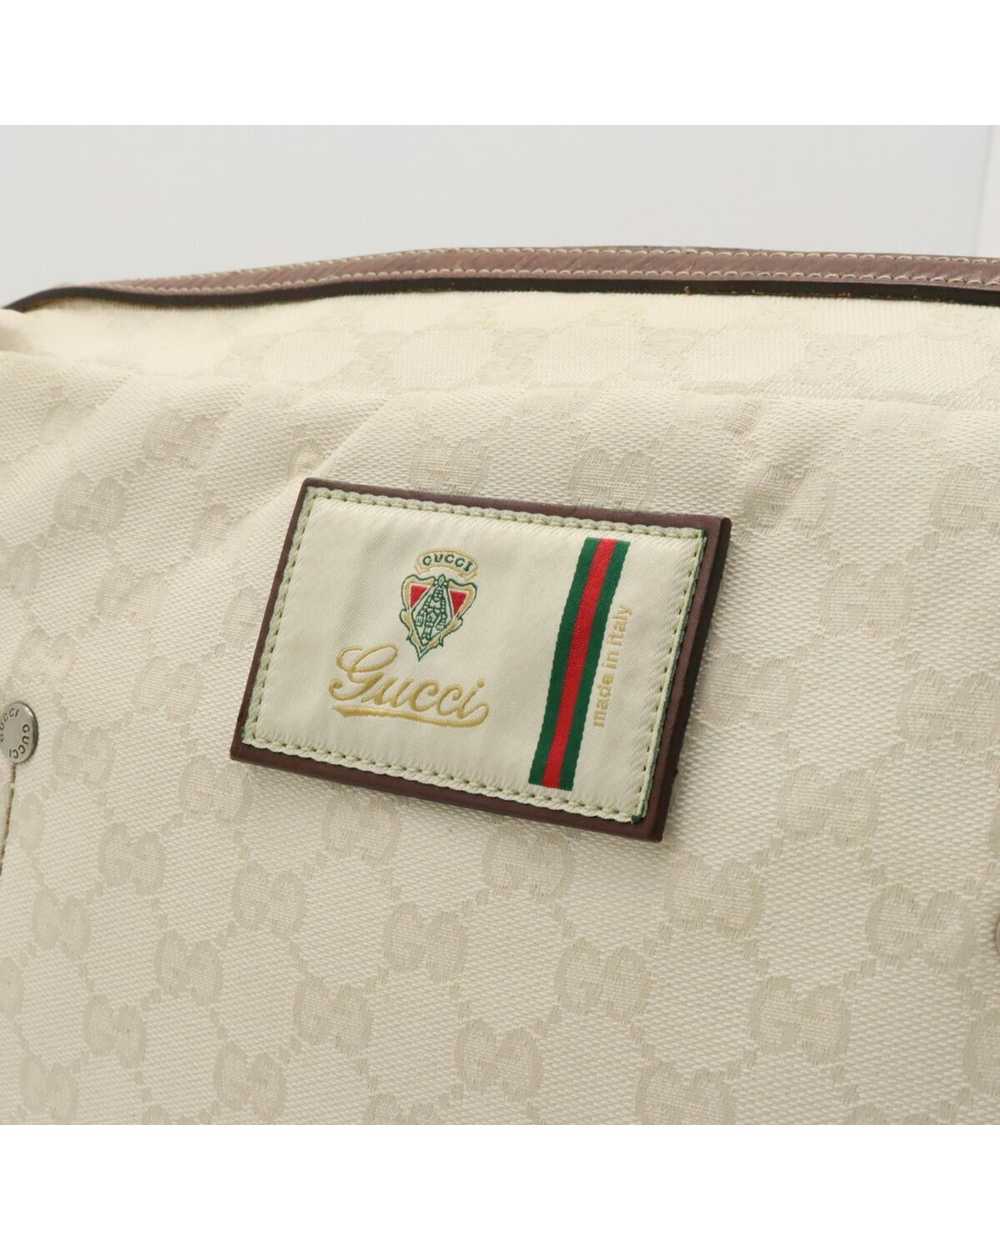 Gucci Canvas Shoulder Bag with Dust Bag by Luxury… - image 9